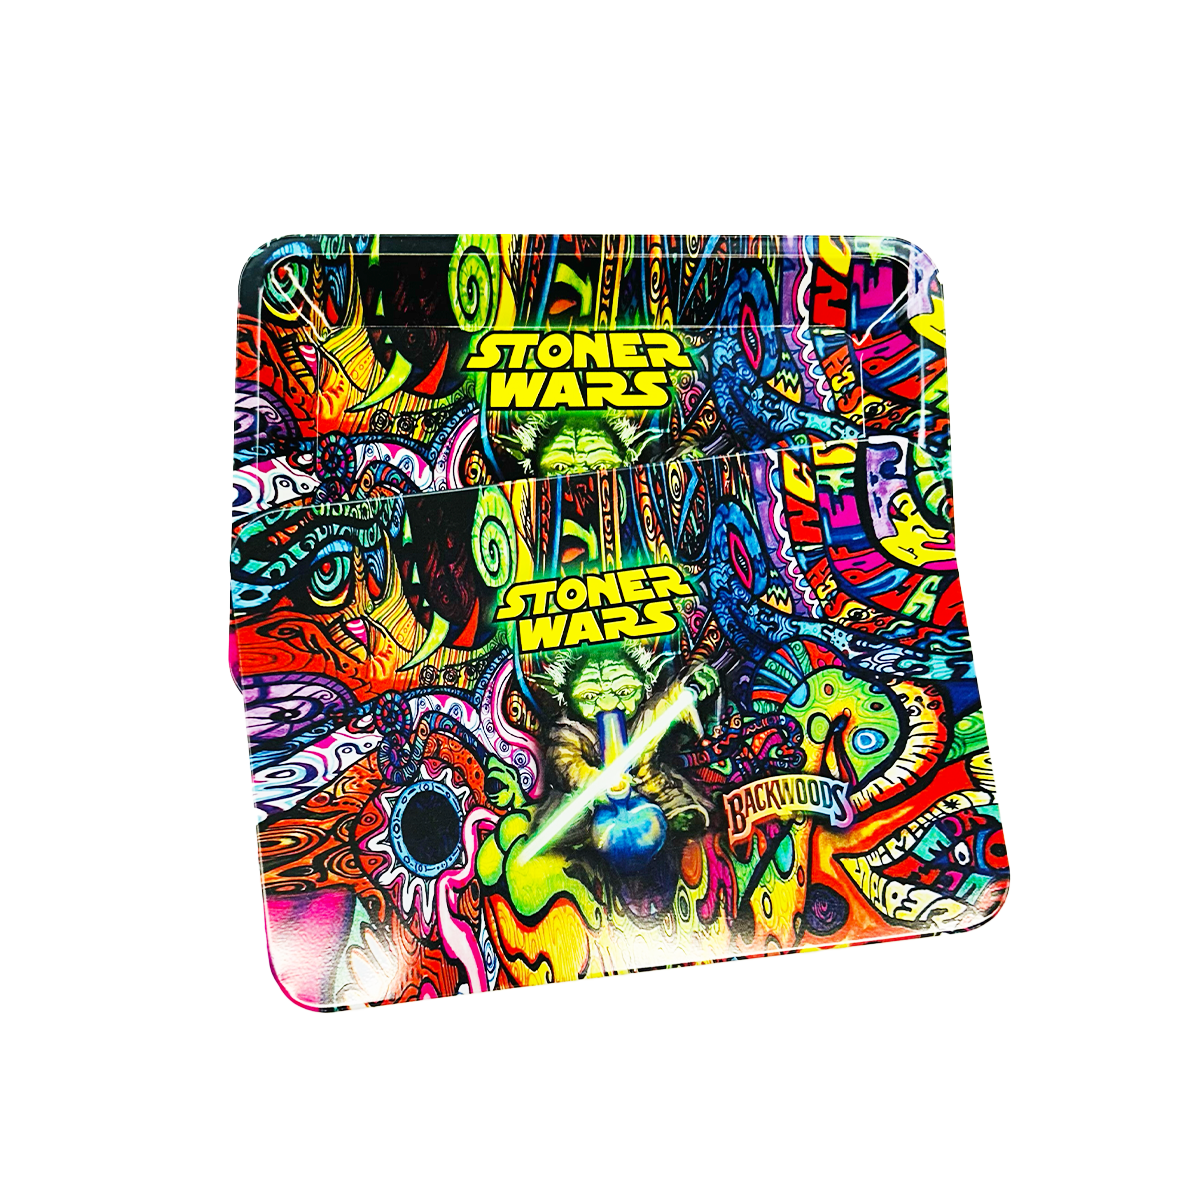 Stoner Wars Magnetic Lid Rolling Tray Small - Size 7in x 5in